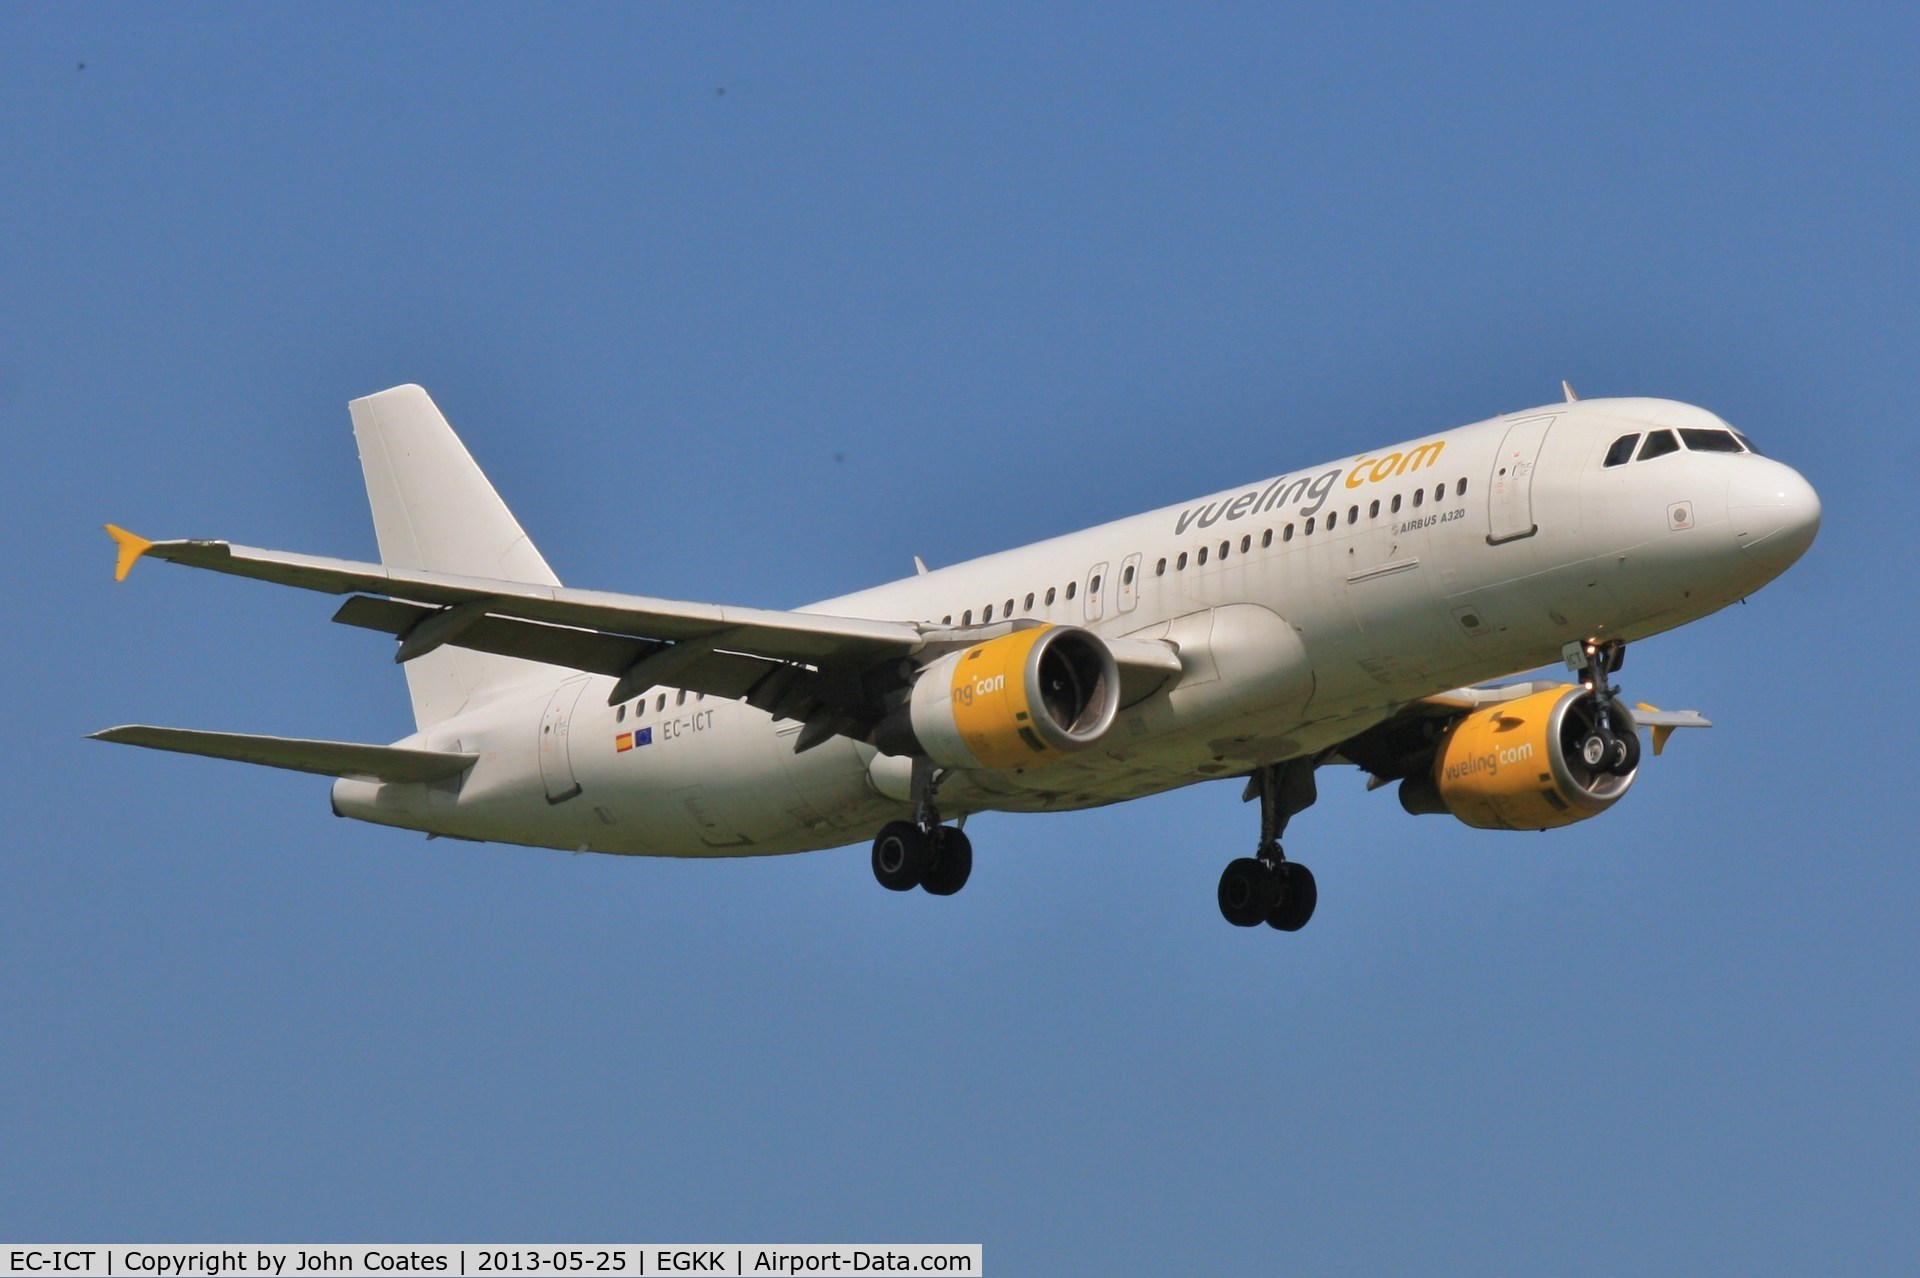 EC-ICT, 1991 Airbus A320-211 C/N 264, On approach to 08R